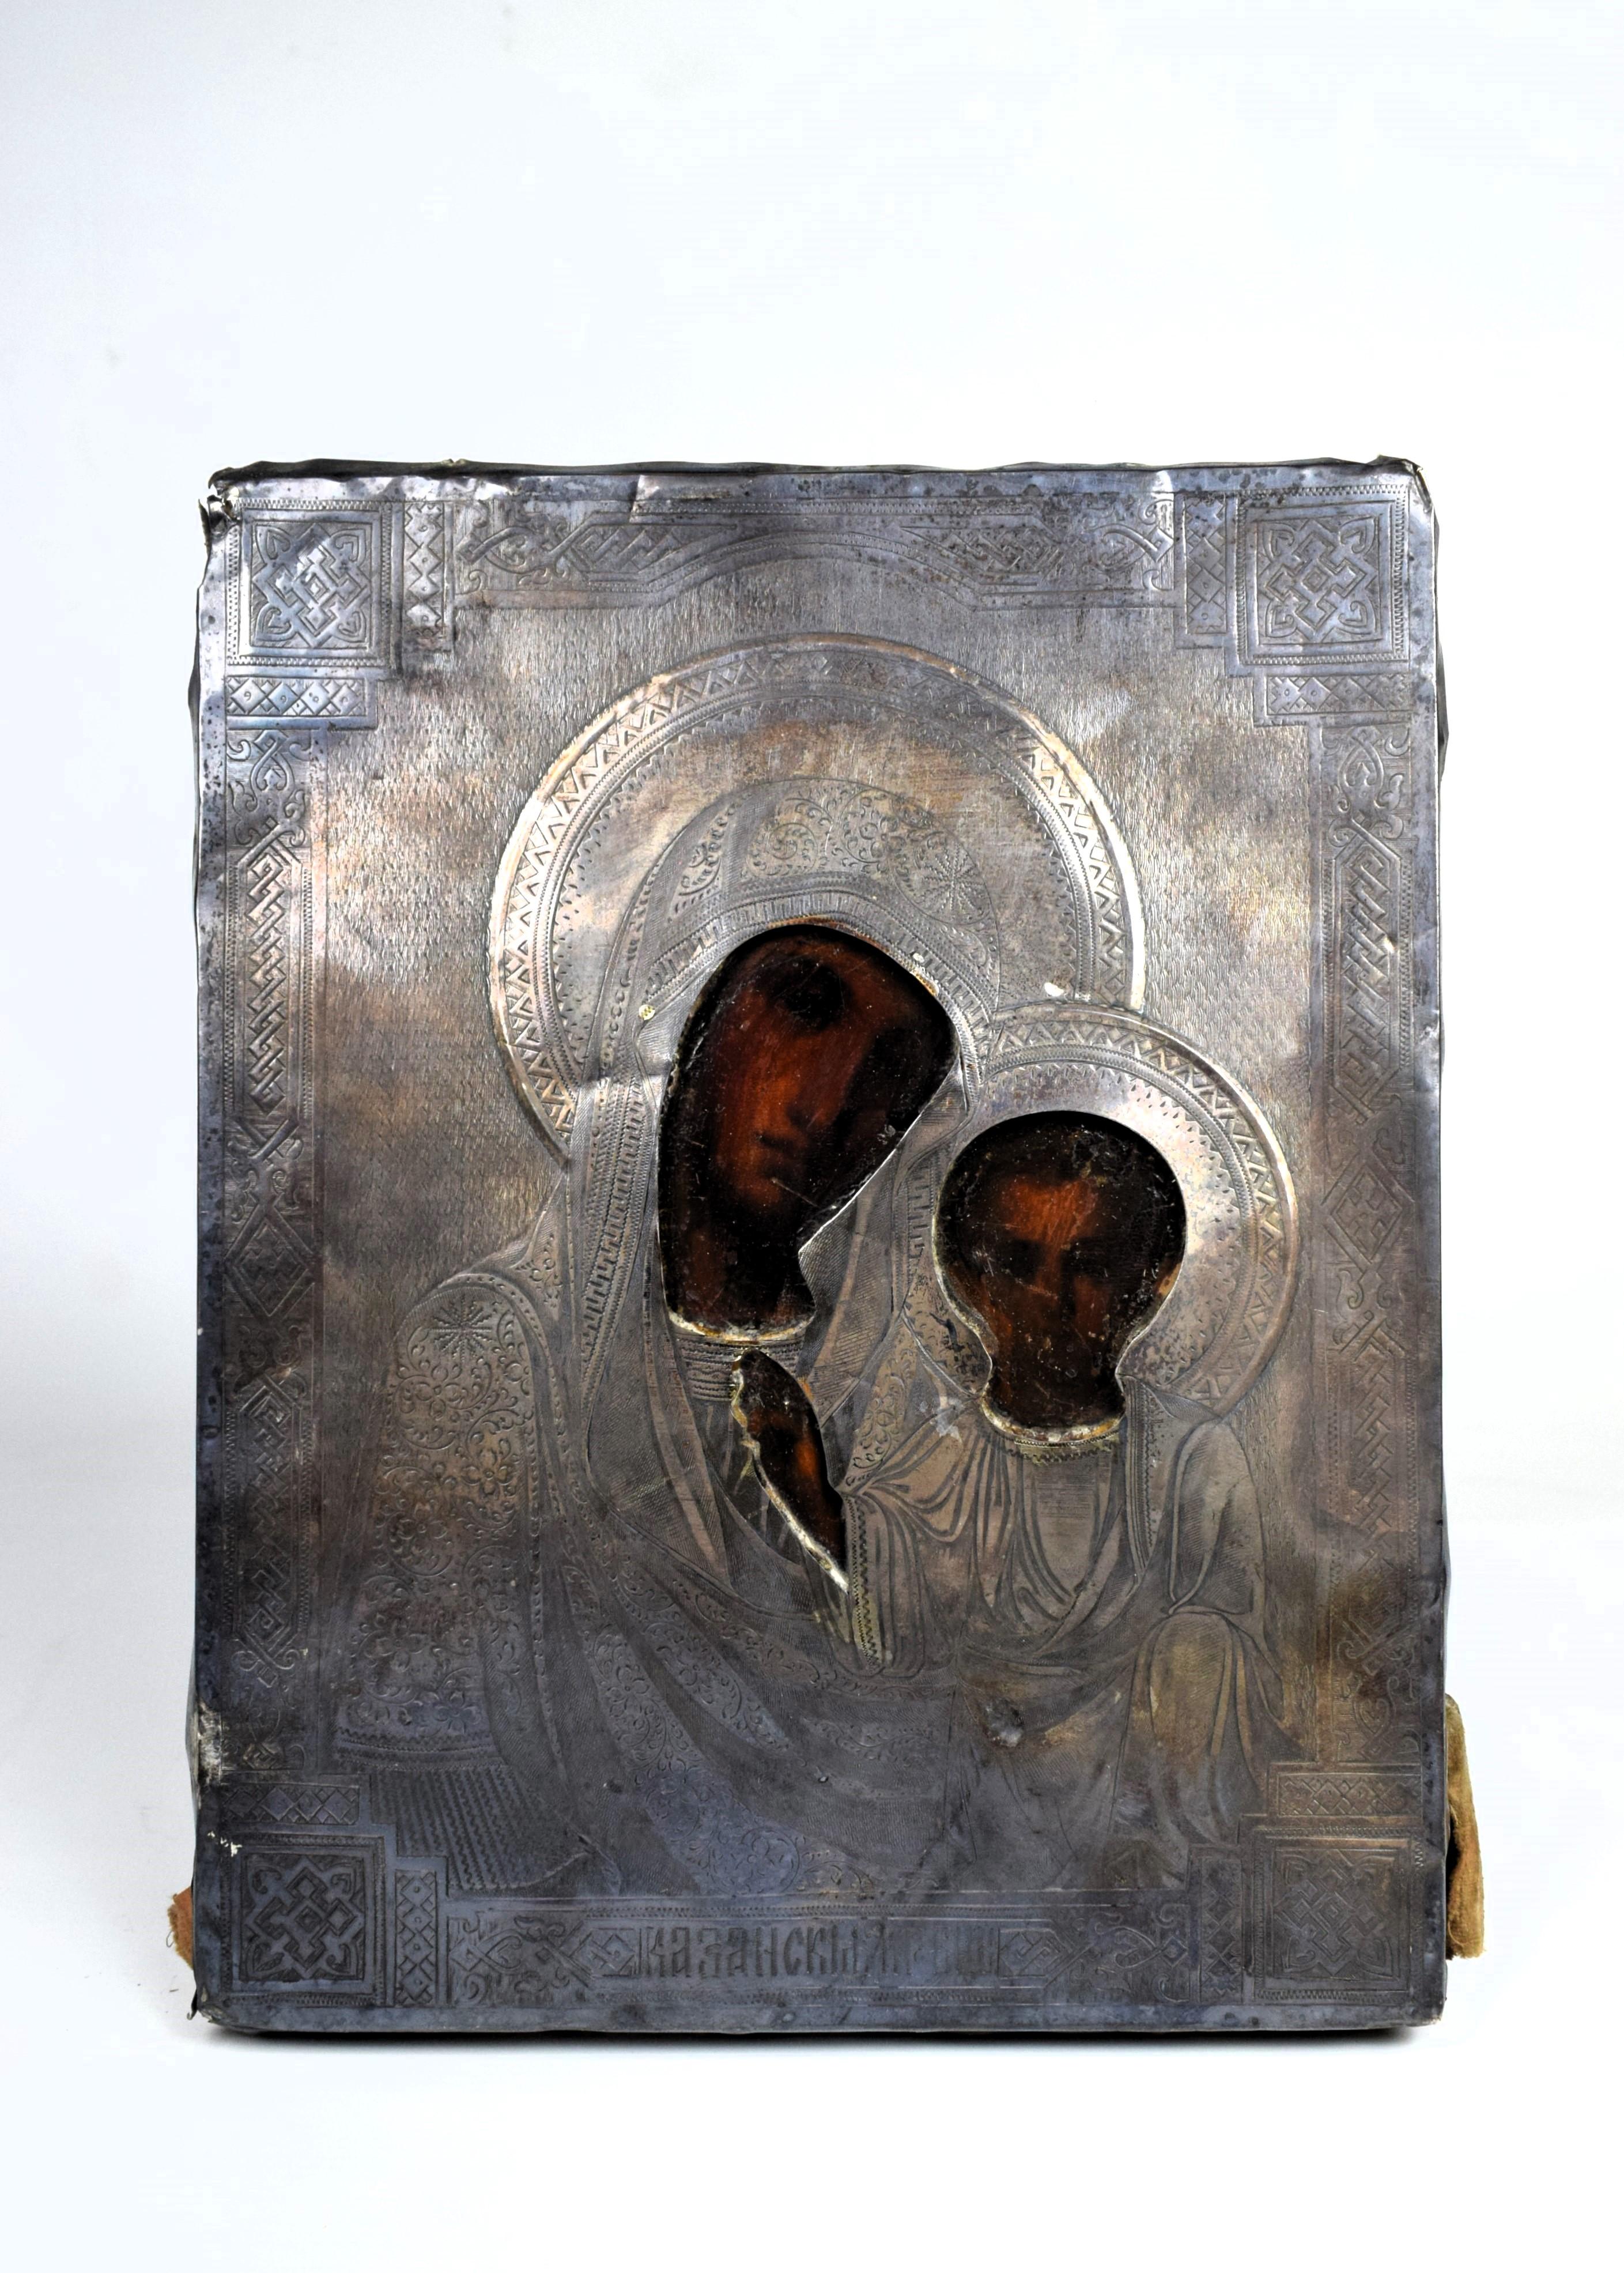 Imperial Russian Silver-Gilt Depicting Icon of Madonna and Child, 19th Century

The silver surface of the rizza is adorned with intricate embossing and engraving, creating a textured and visually captivating background for the central depiction of